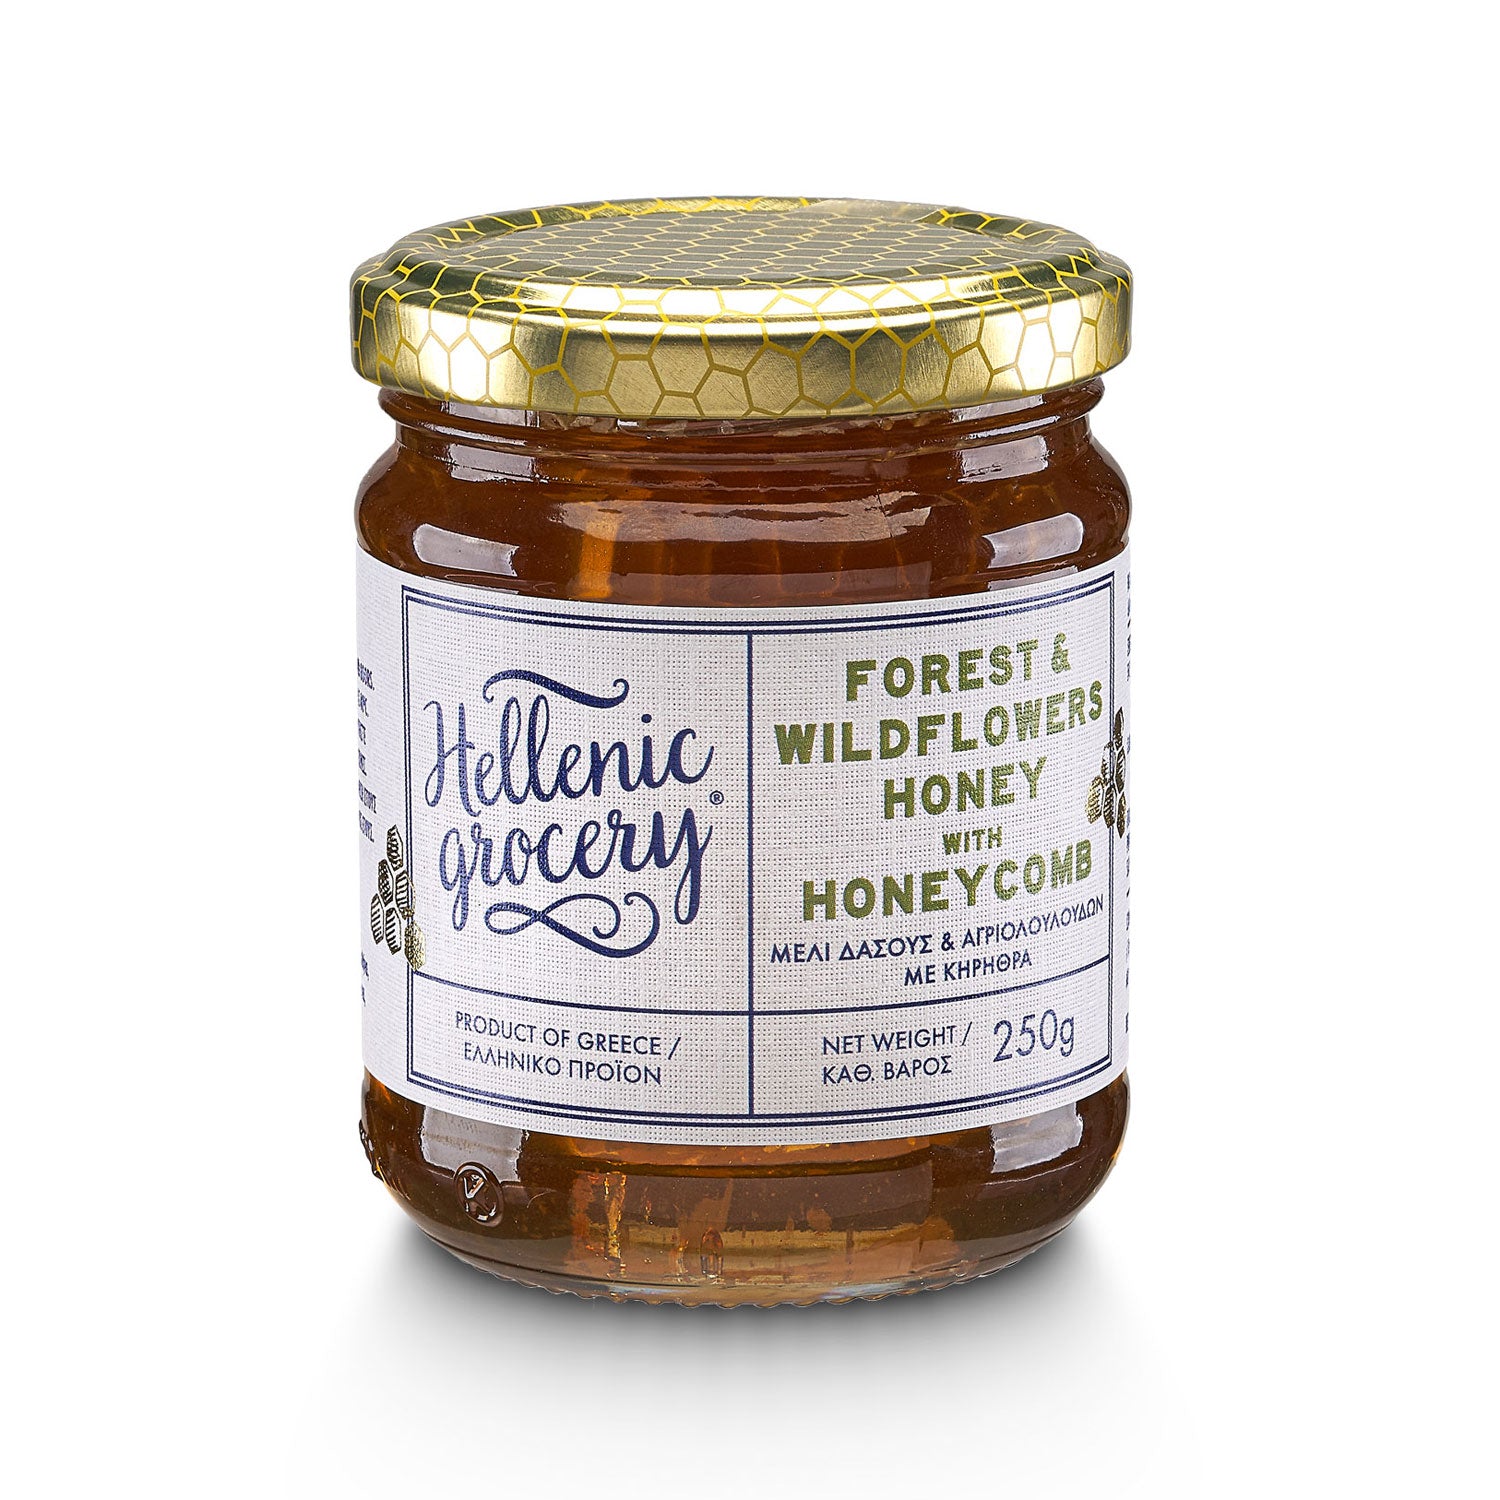 Forest and Wildflowers Honey with Honeycomb - 250g - Hellenic Grocery